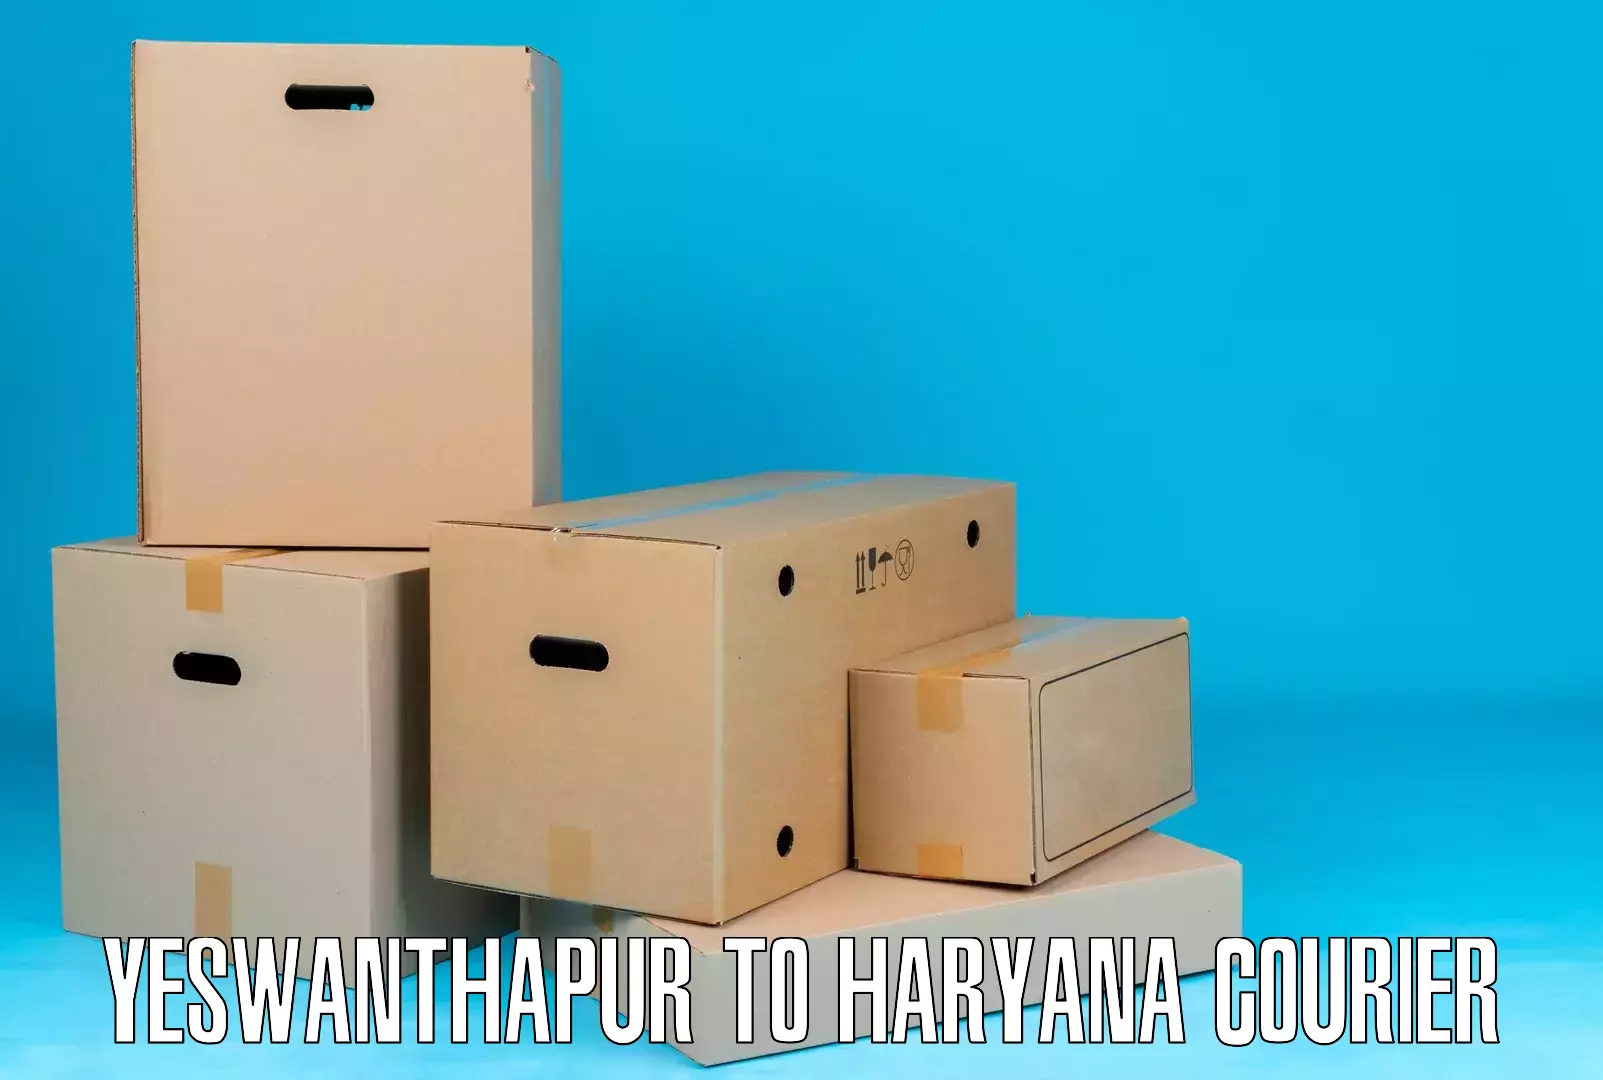 Tailored shipping plans Yeswanthapur to Gurgaon